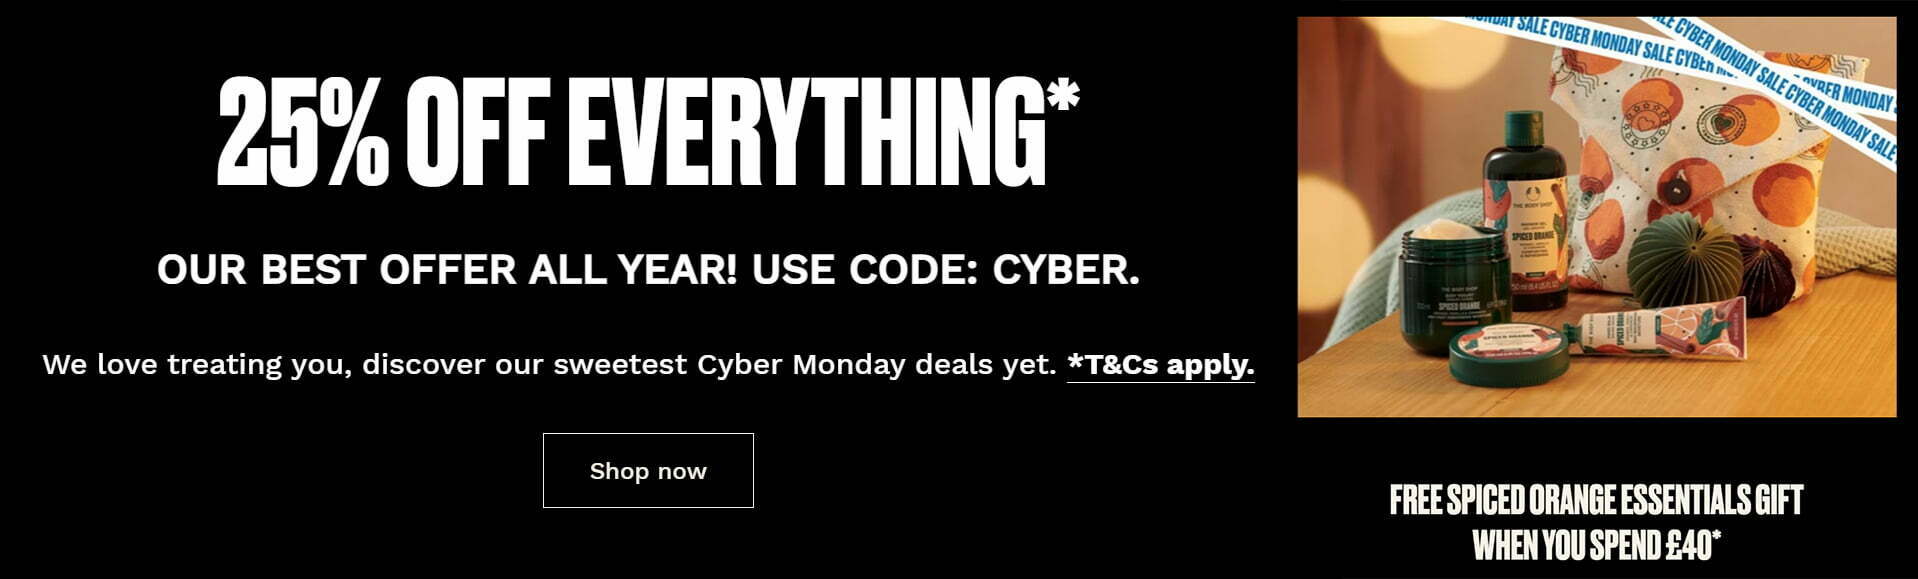 Cyber Monday at The Body Shop: 25% off